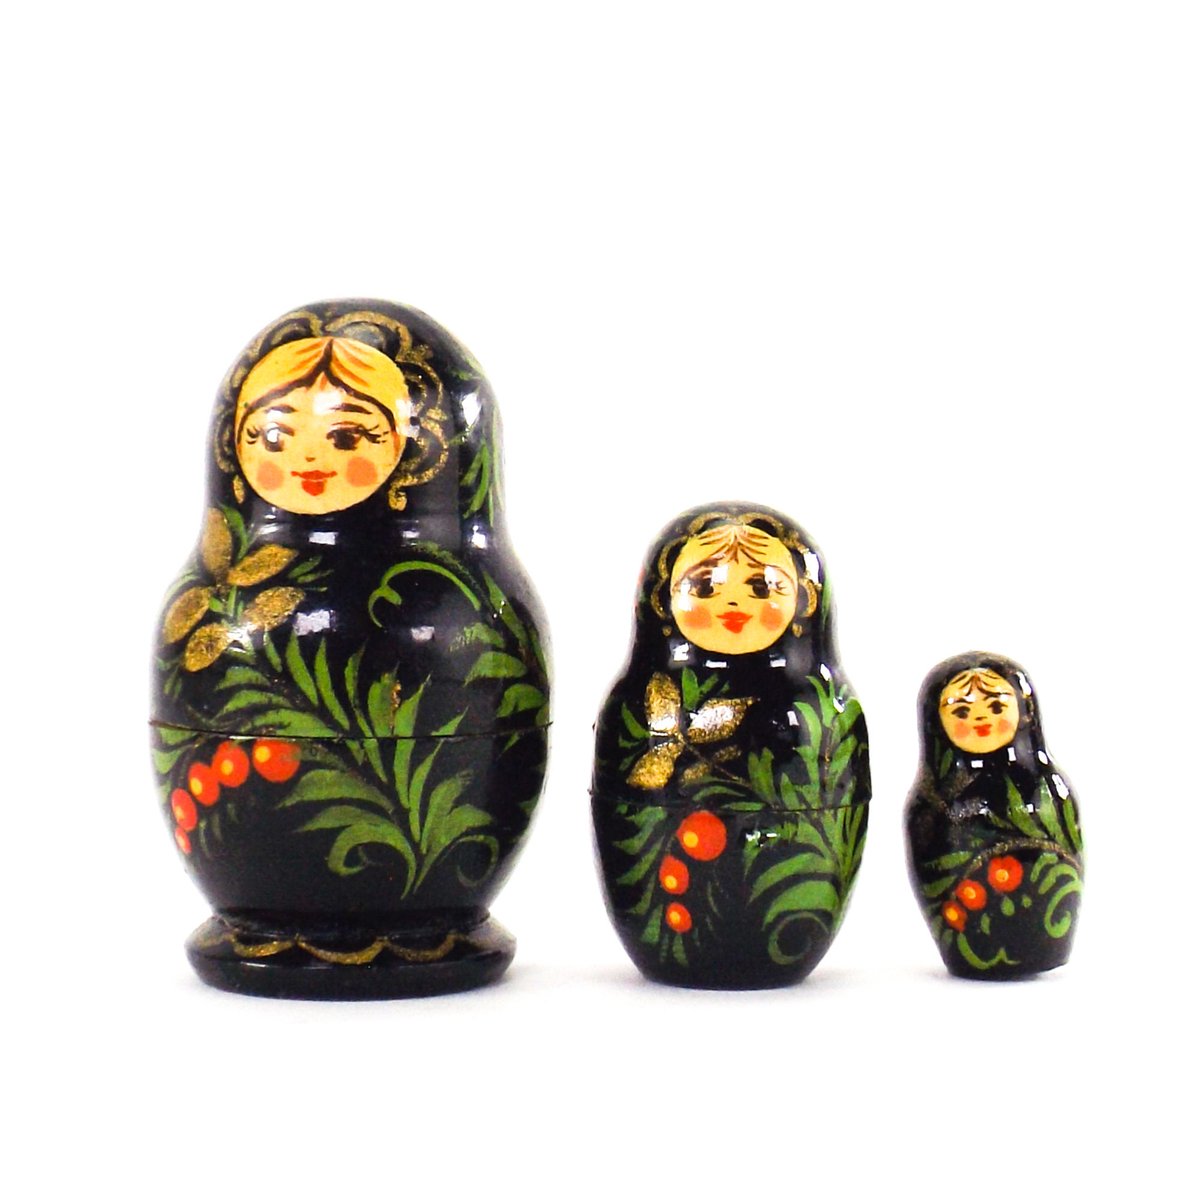 Excited to share the latest addition to my #etsy shop: vintage matryoshka nesting dolls black and red blonde vintage etsy.me/3rJW9Lf #black #red #matryoshkadolls #matryoshkanesting #nestingdolls #nestingdoll #woodnestingdolls #handpainteddolls #vintagedoll